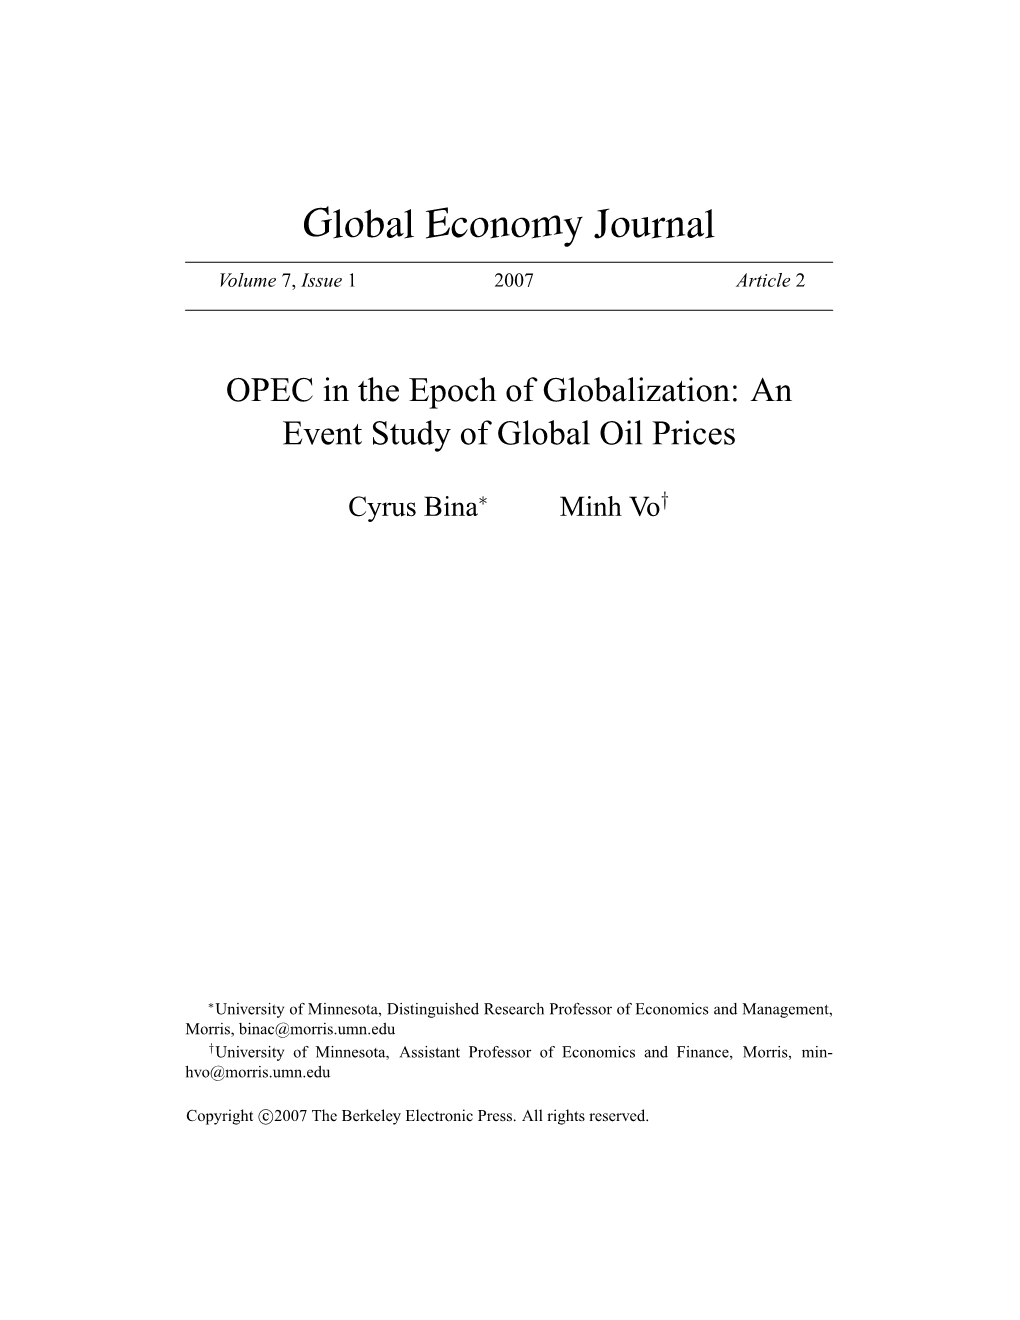 OPEC in the Epoch of Globalization: an Event Study of Global Oil Prices